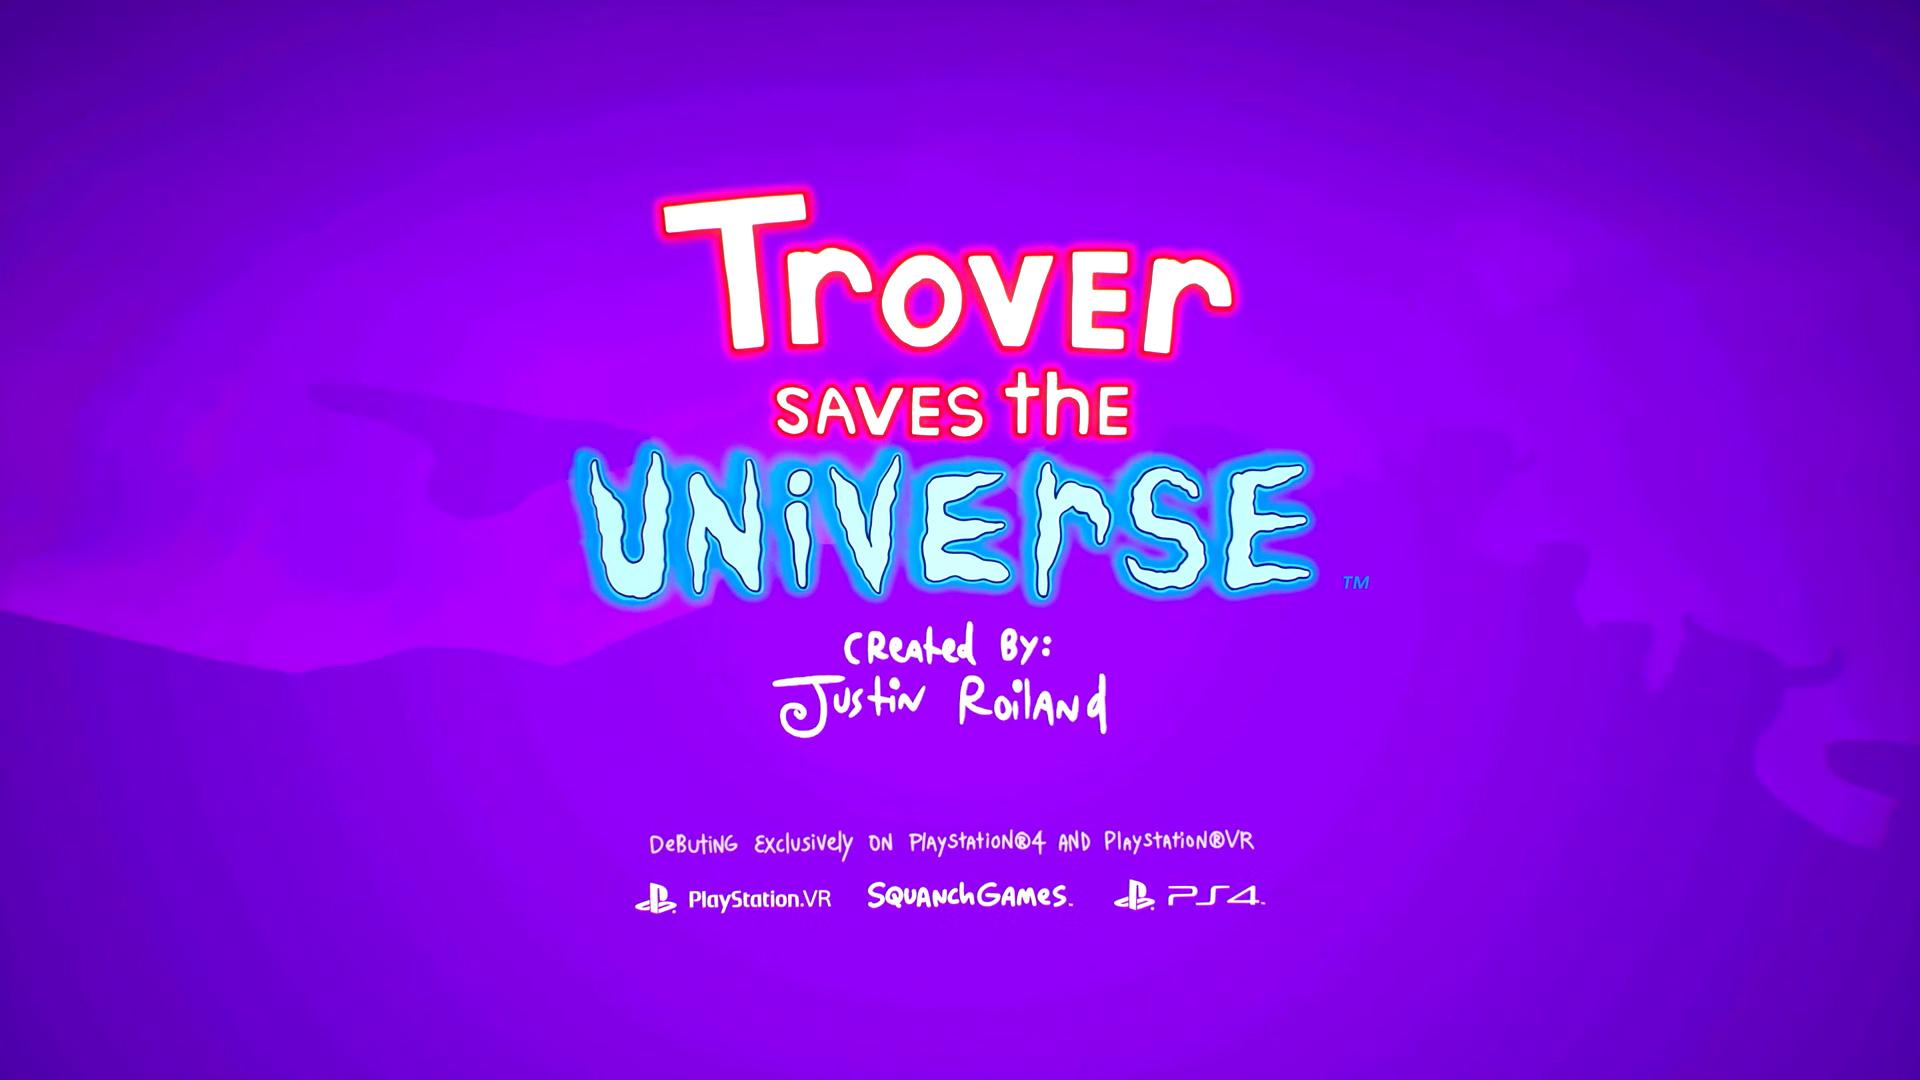 Squanch Games Announces 'Trover Saves the Universe' for PSVR & PS4